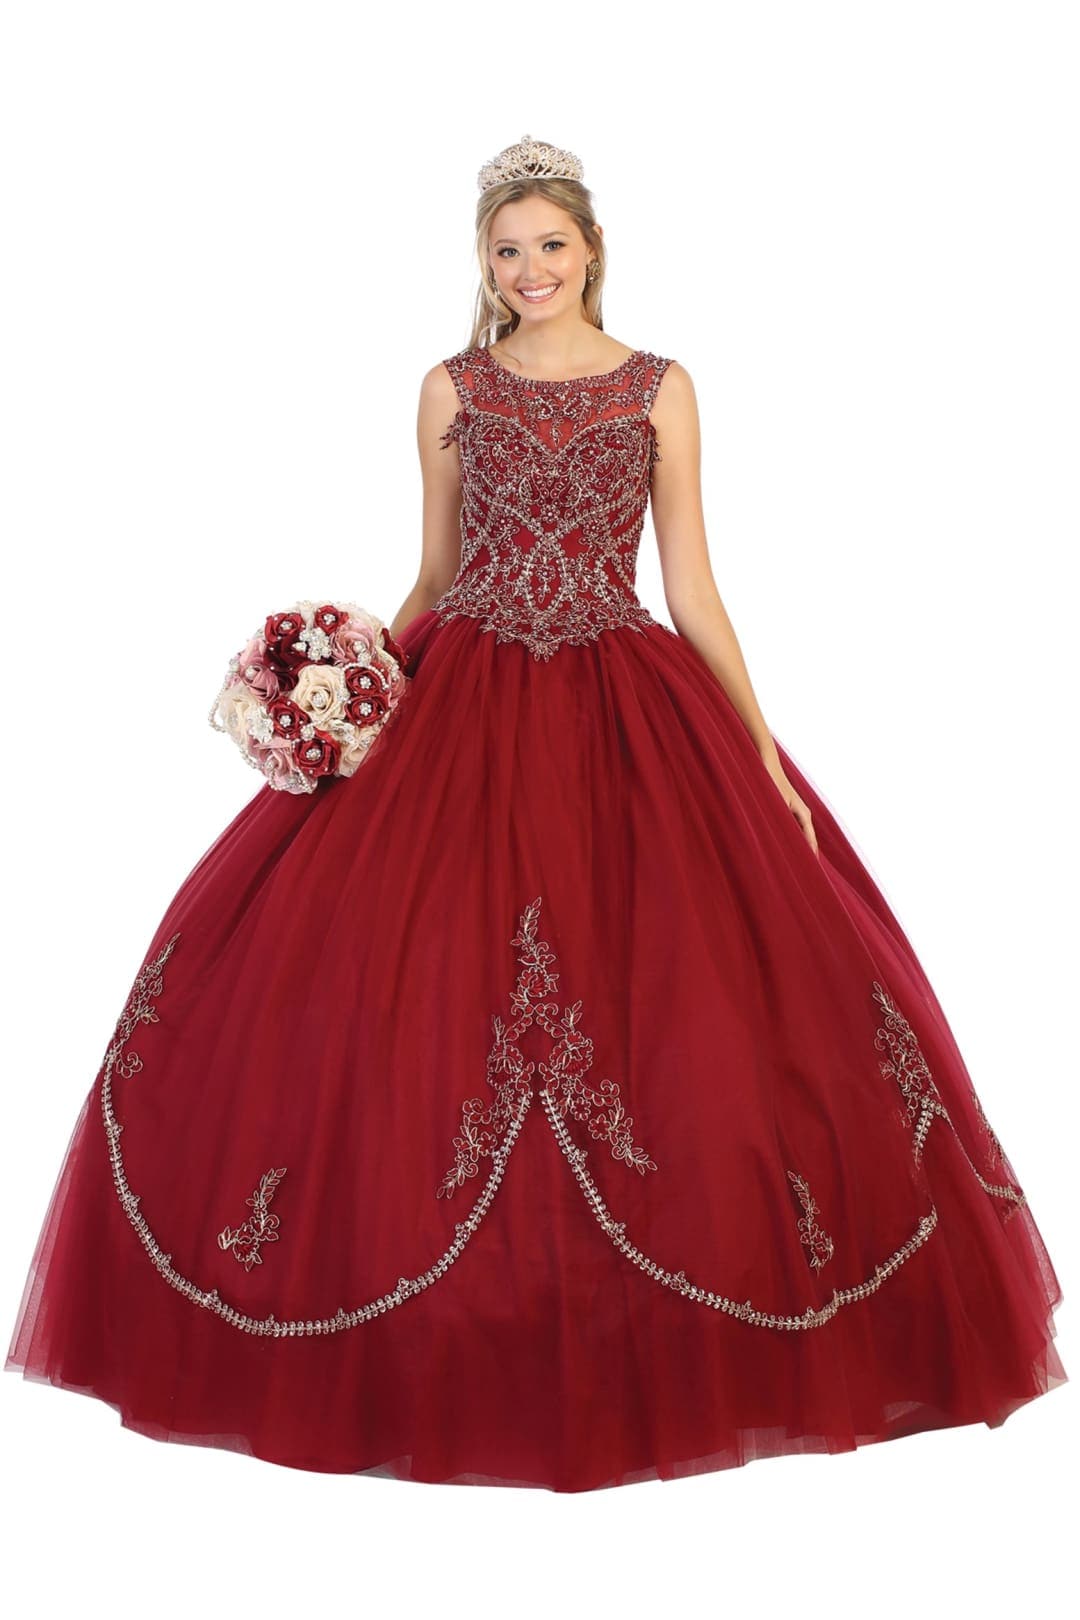 Enchanting Quinceanera Ball Gown - Burgundy/Gold / 4